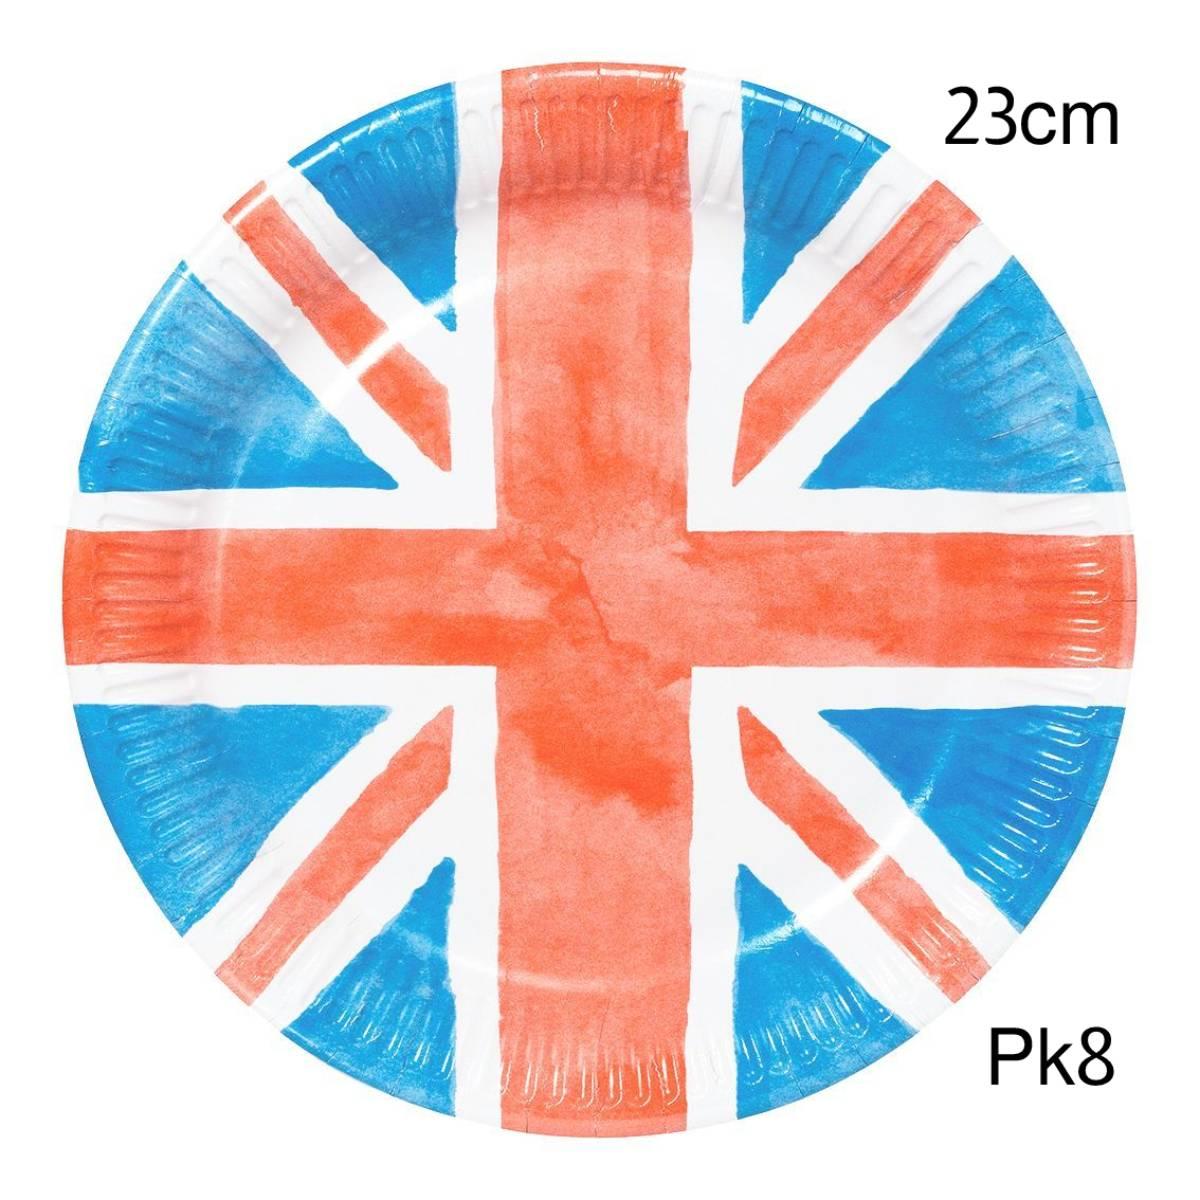 Best of British 23cm Paper Plate by Talking Tables BRIT20-PLATE available here at Karnival Costumes online party shop